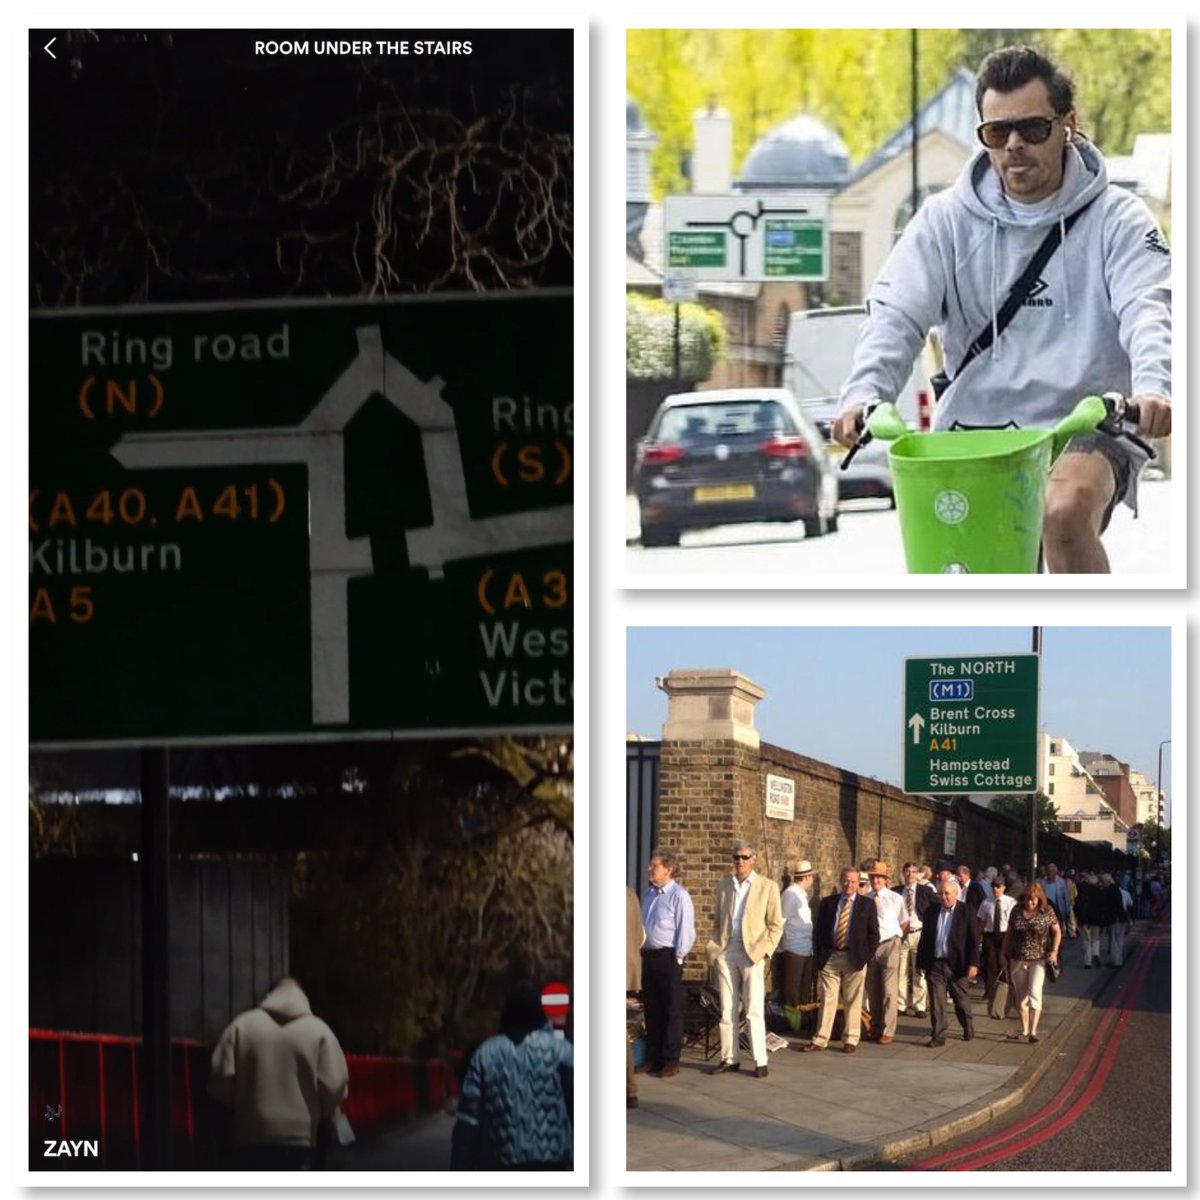 How often do you think Harry has a signpost in a picture of where he is in London.. interestingly, the left in Zayn’s video and the right in Harry’s photo are both heading to Kilburn. Took a while, I could read Brent Cross but wasn’t quite convinced it was Kilburn.. I mean👀